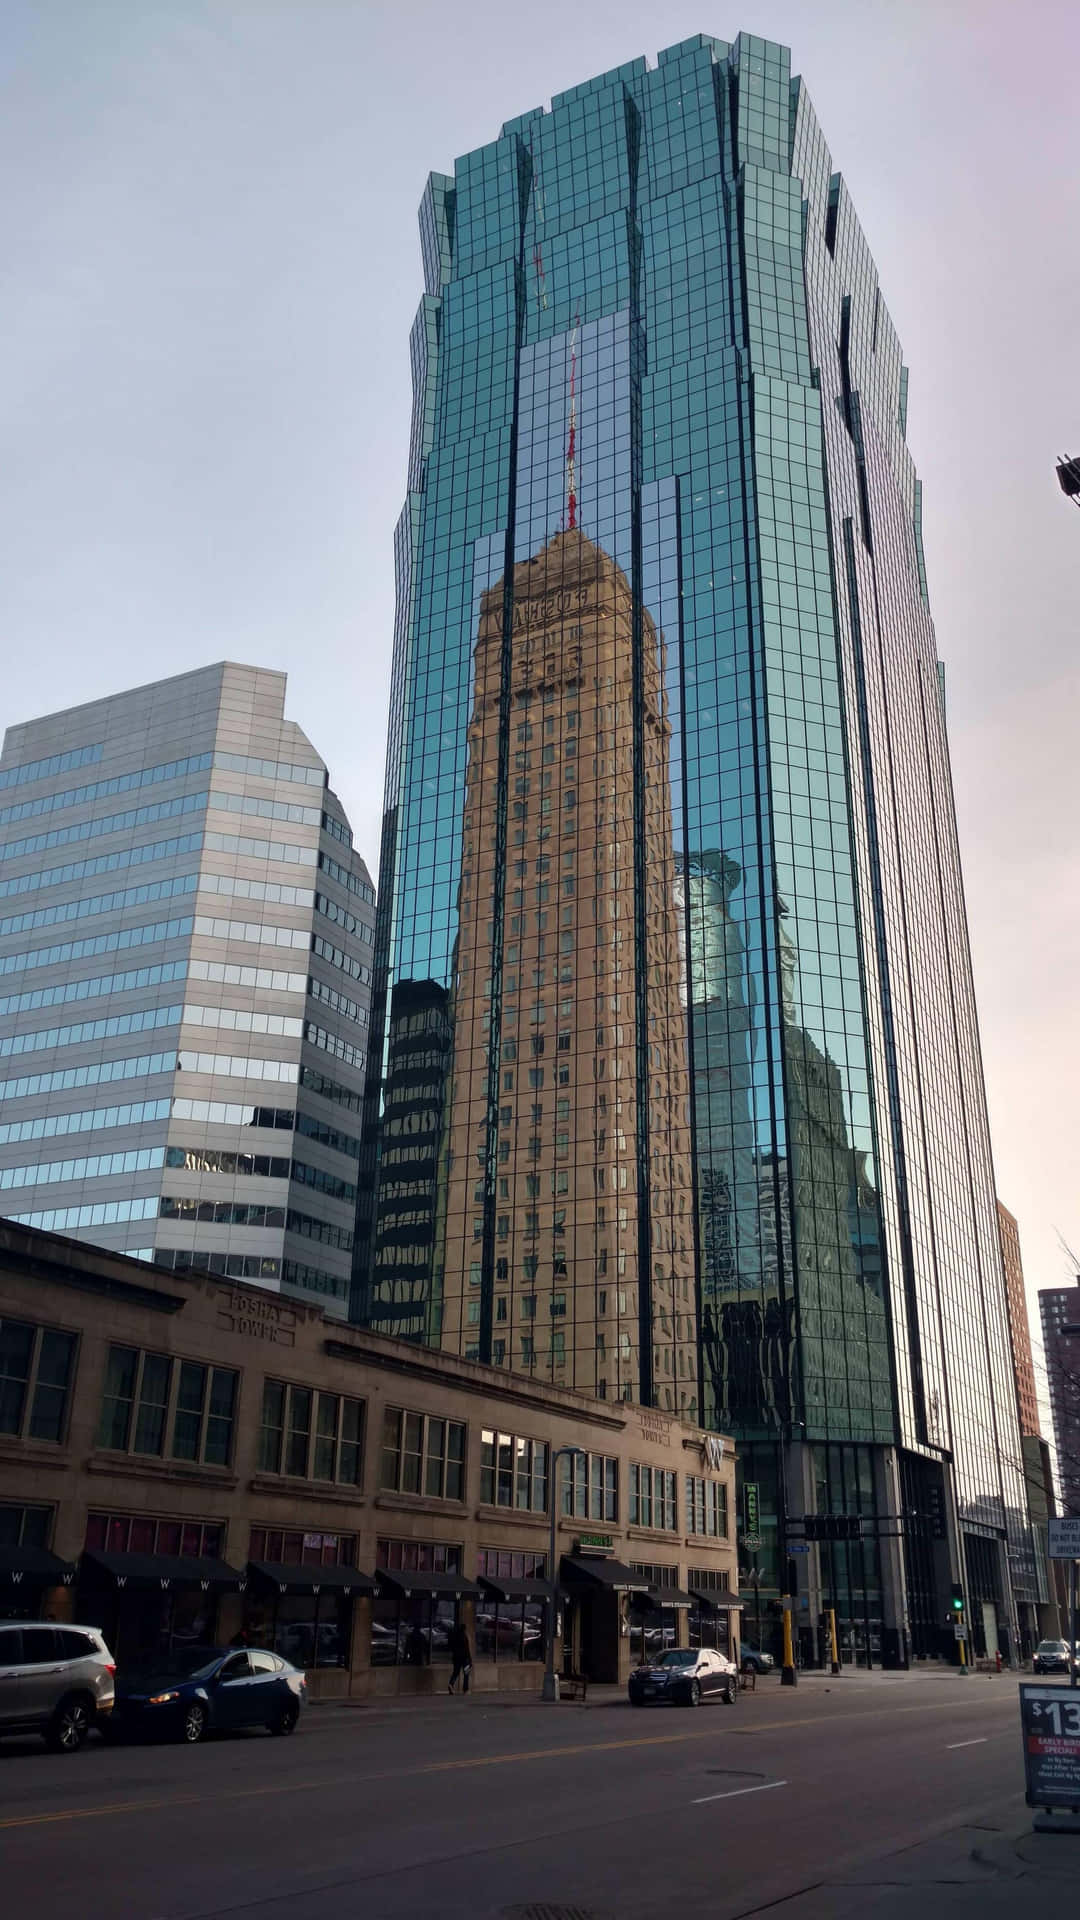 A majestic building in the city skyline